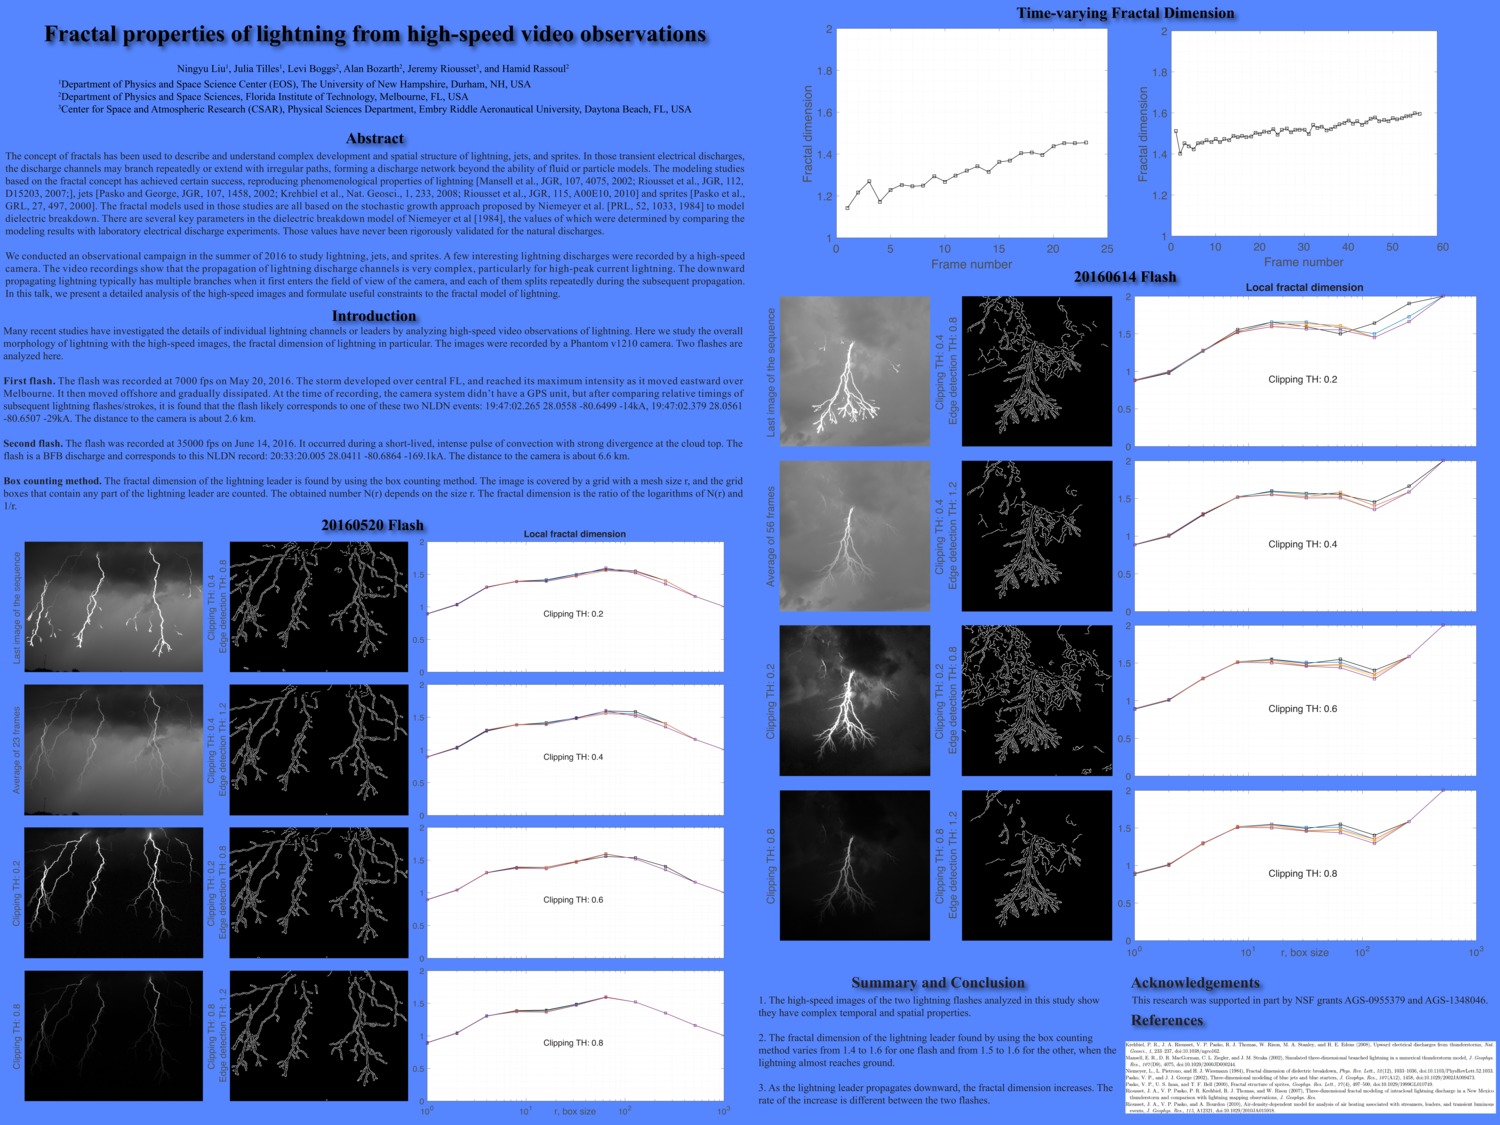 Fractal Properties Of Lightning From High-Speed Video Observations by ningyuliu